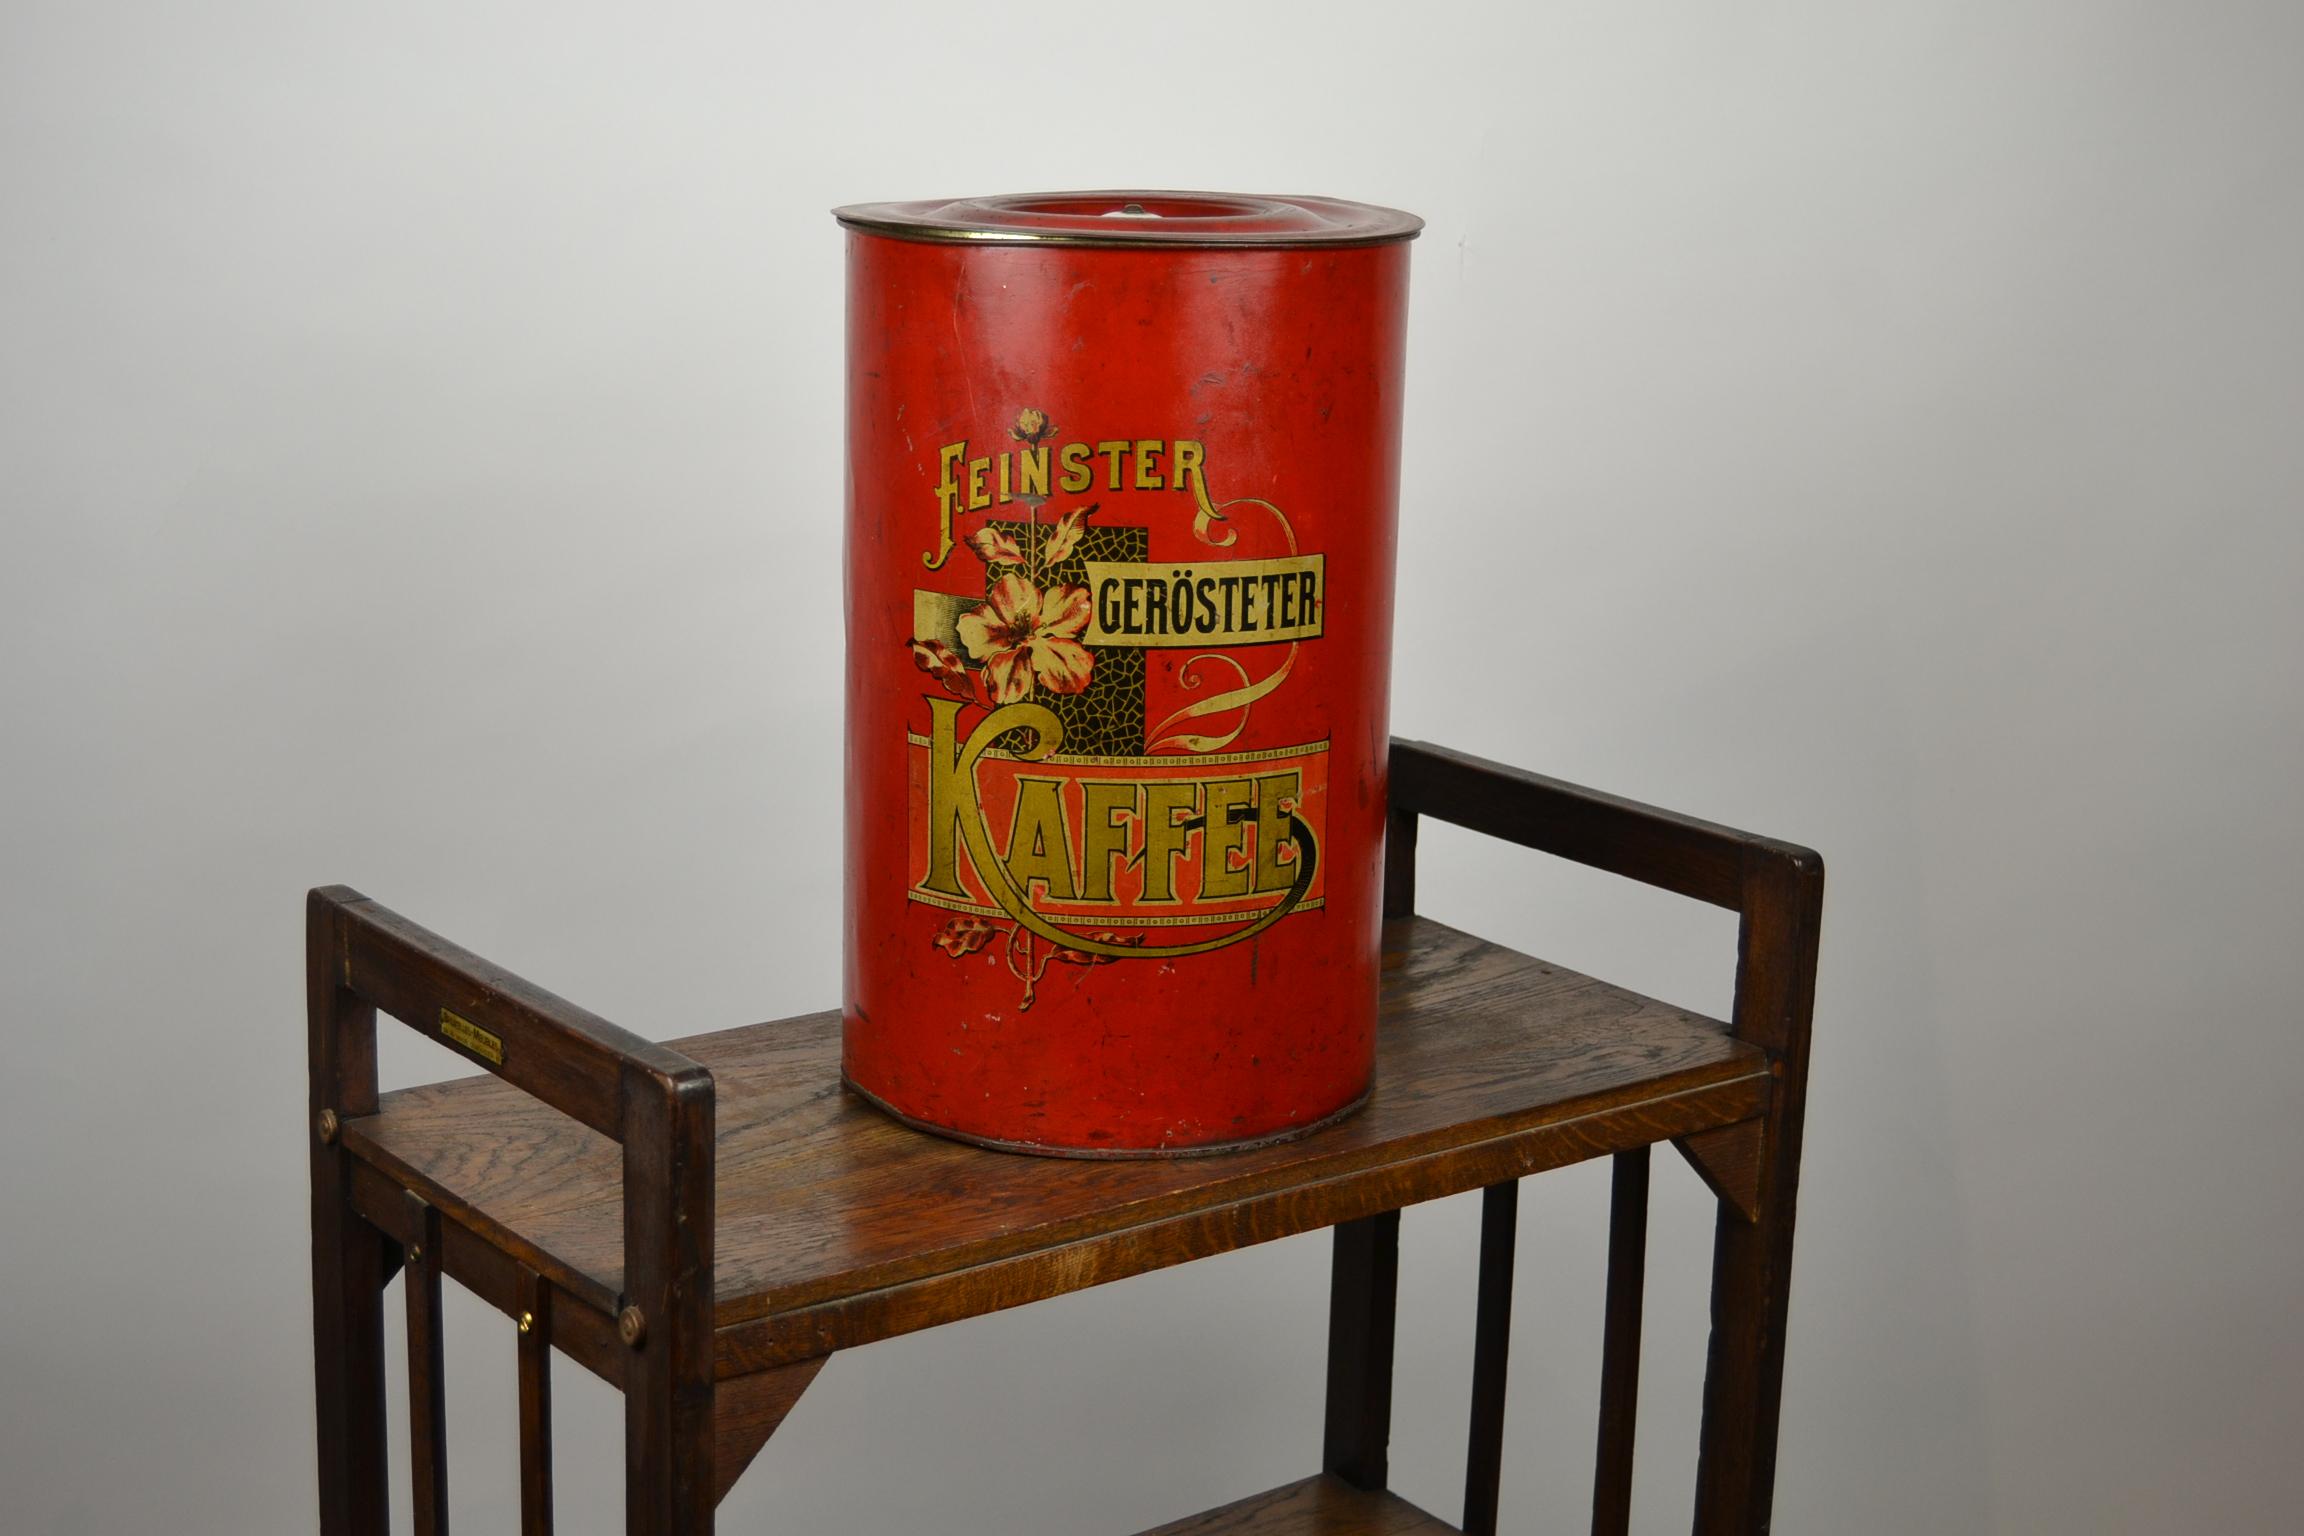 Art Nouveau - Jugendstil metal tube coffee box - coffee can - vintage coffee container - coffee bin . 
Red tole - Toleware - Tin Storage Box with 
lithographic design of flowers and gold lettering. 
The cover has also a porcelain knob. 
This